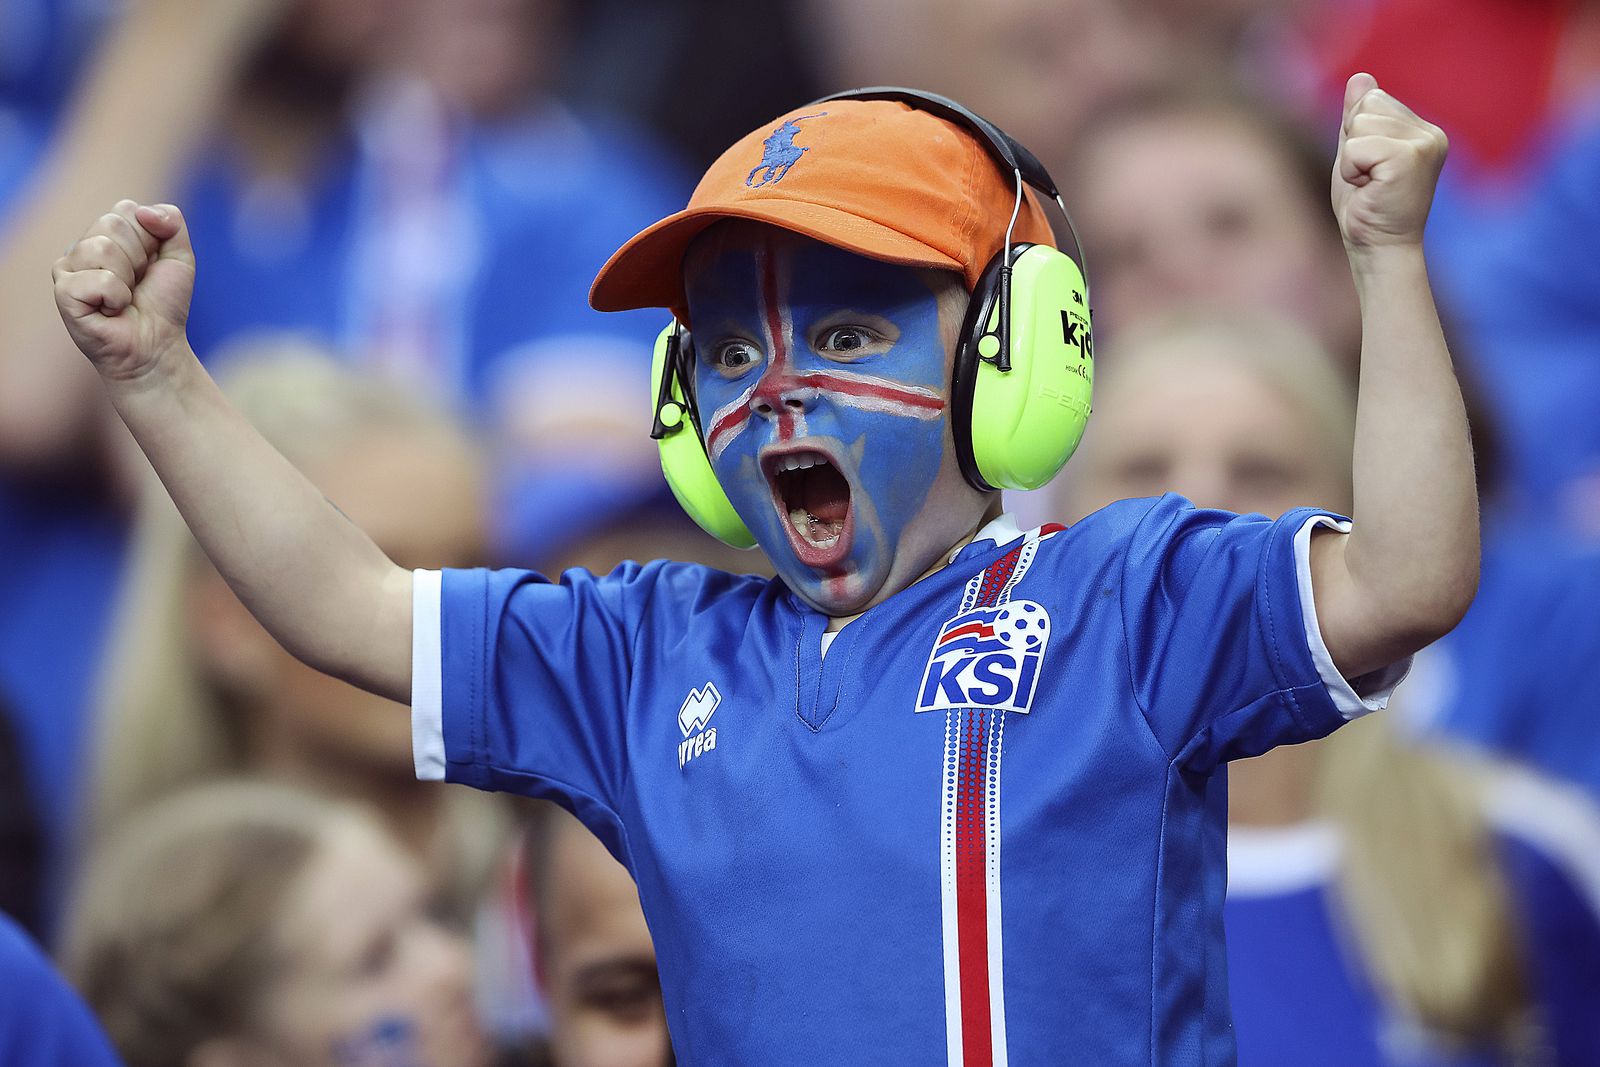 The Iceland fans were all brilliant but I loved this little guy. (400mm, ISO1600, 1/800th, f3.5)